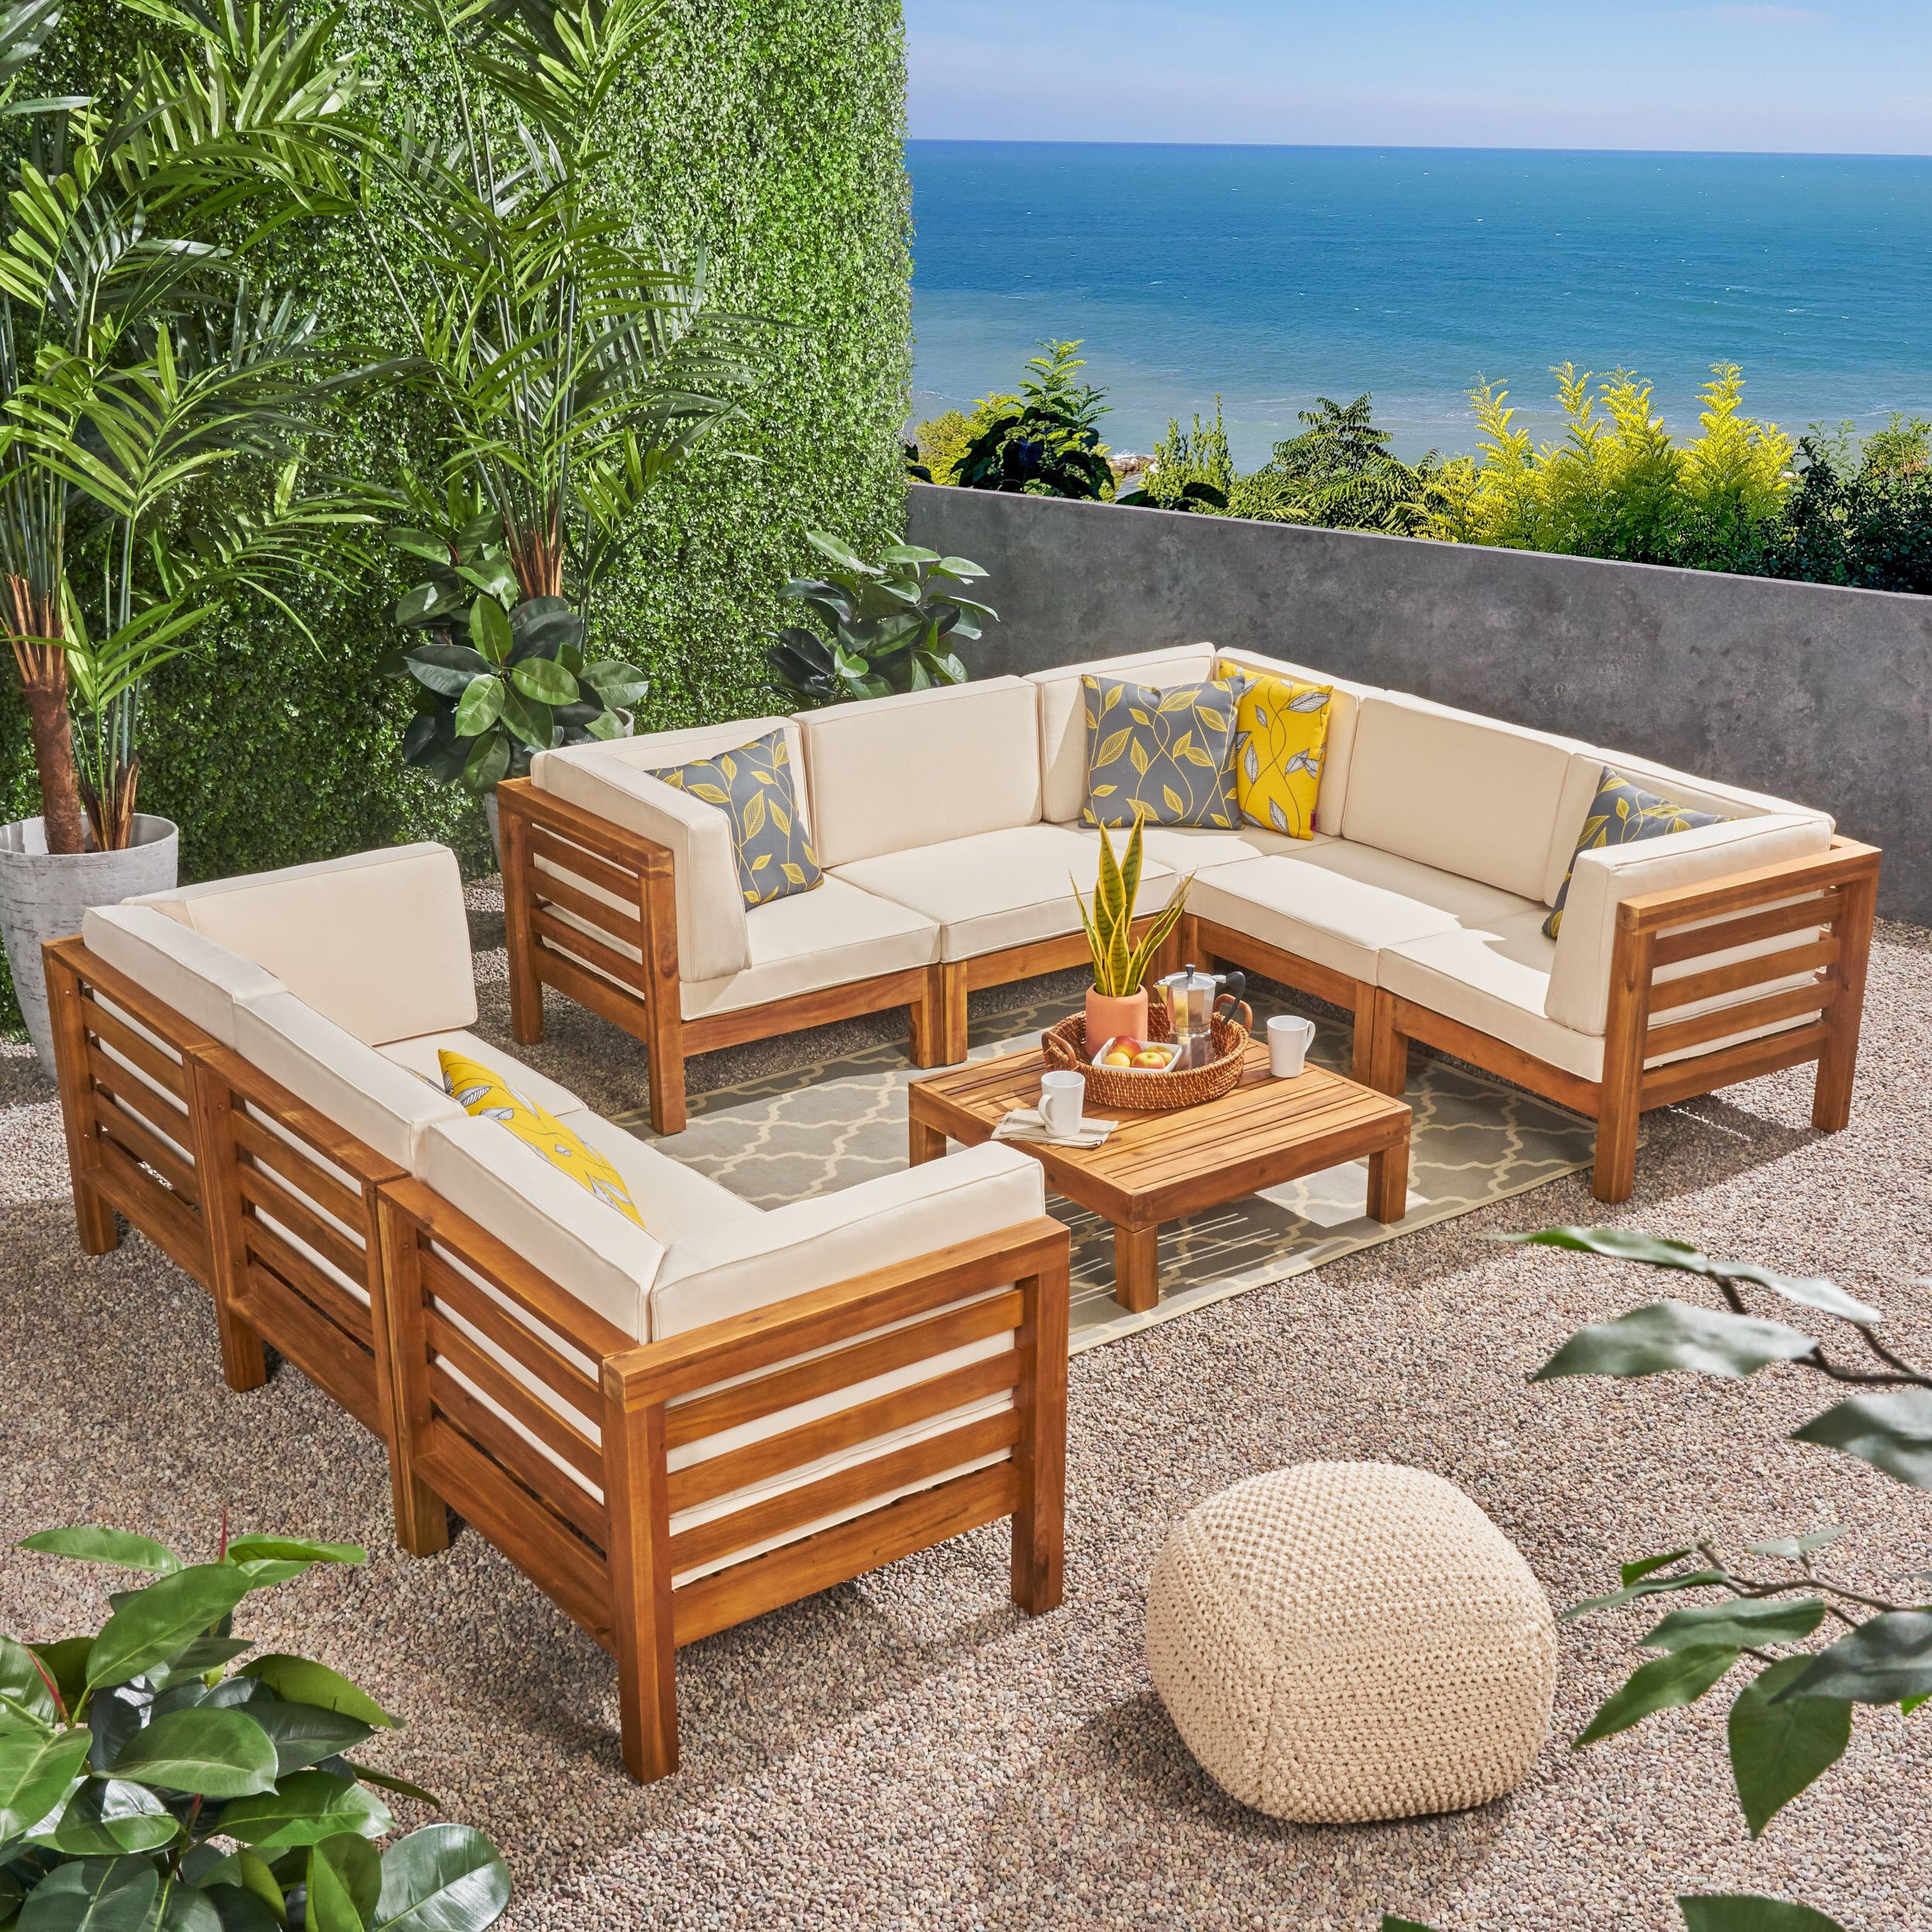 Widely Used Scancom Patio Furniture Teak (View 13 of 25)